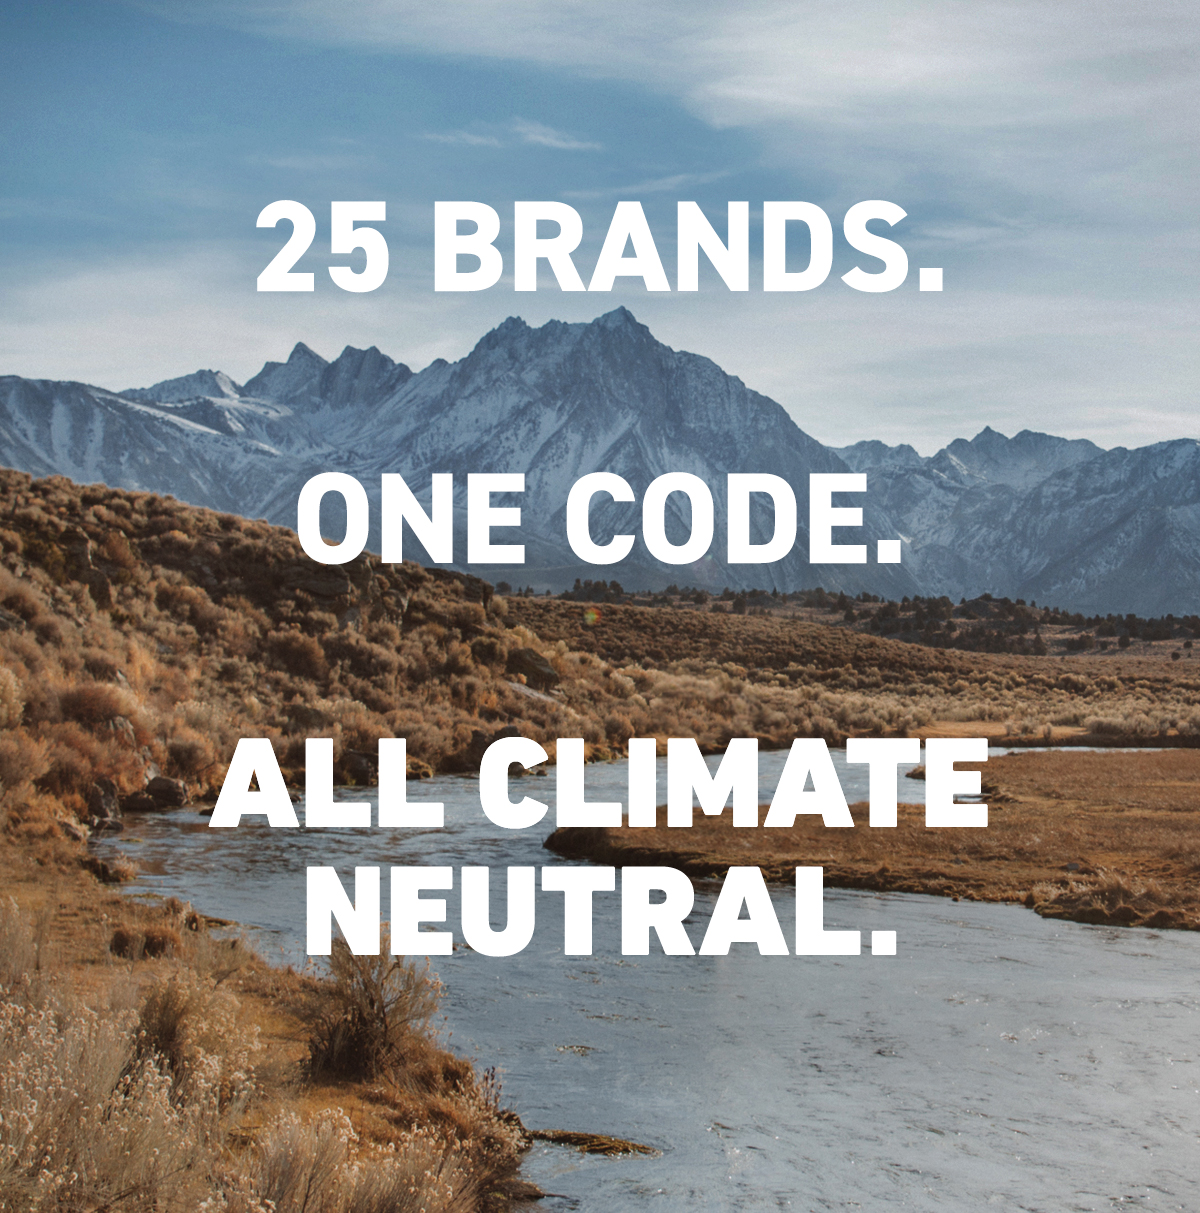 25 Brands. One Code. All Climate Neutral.